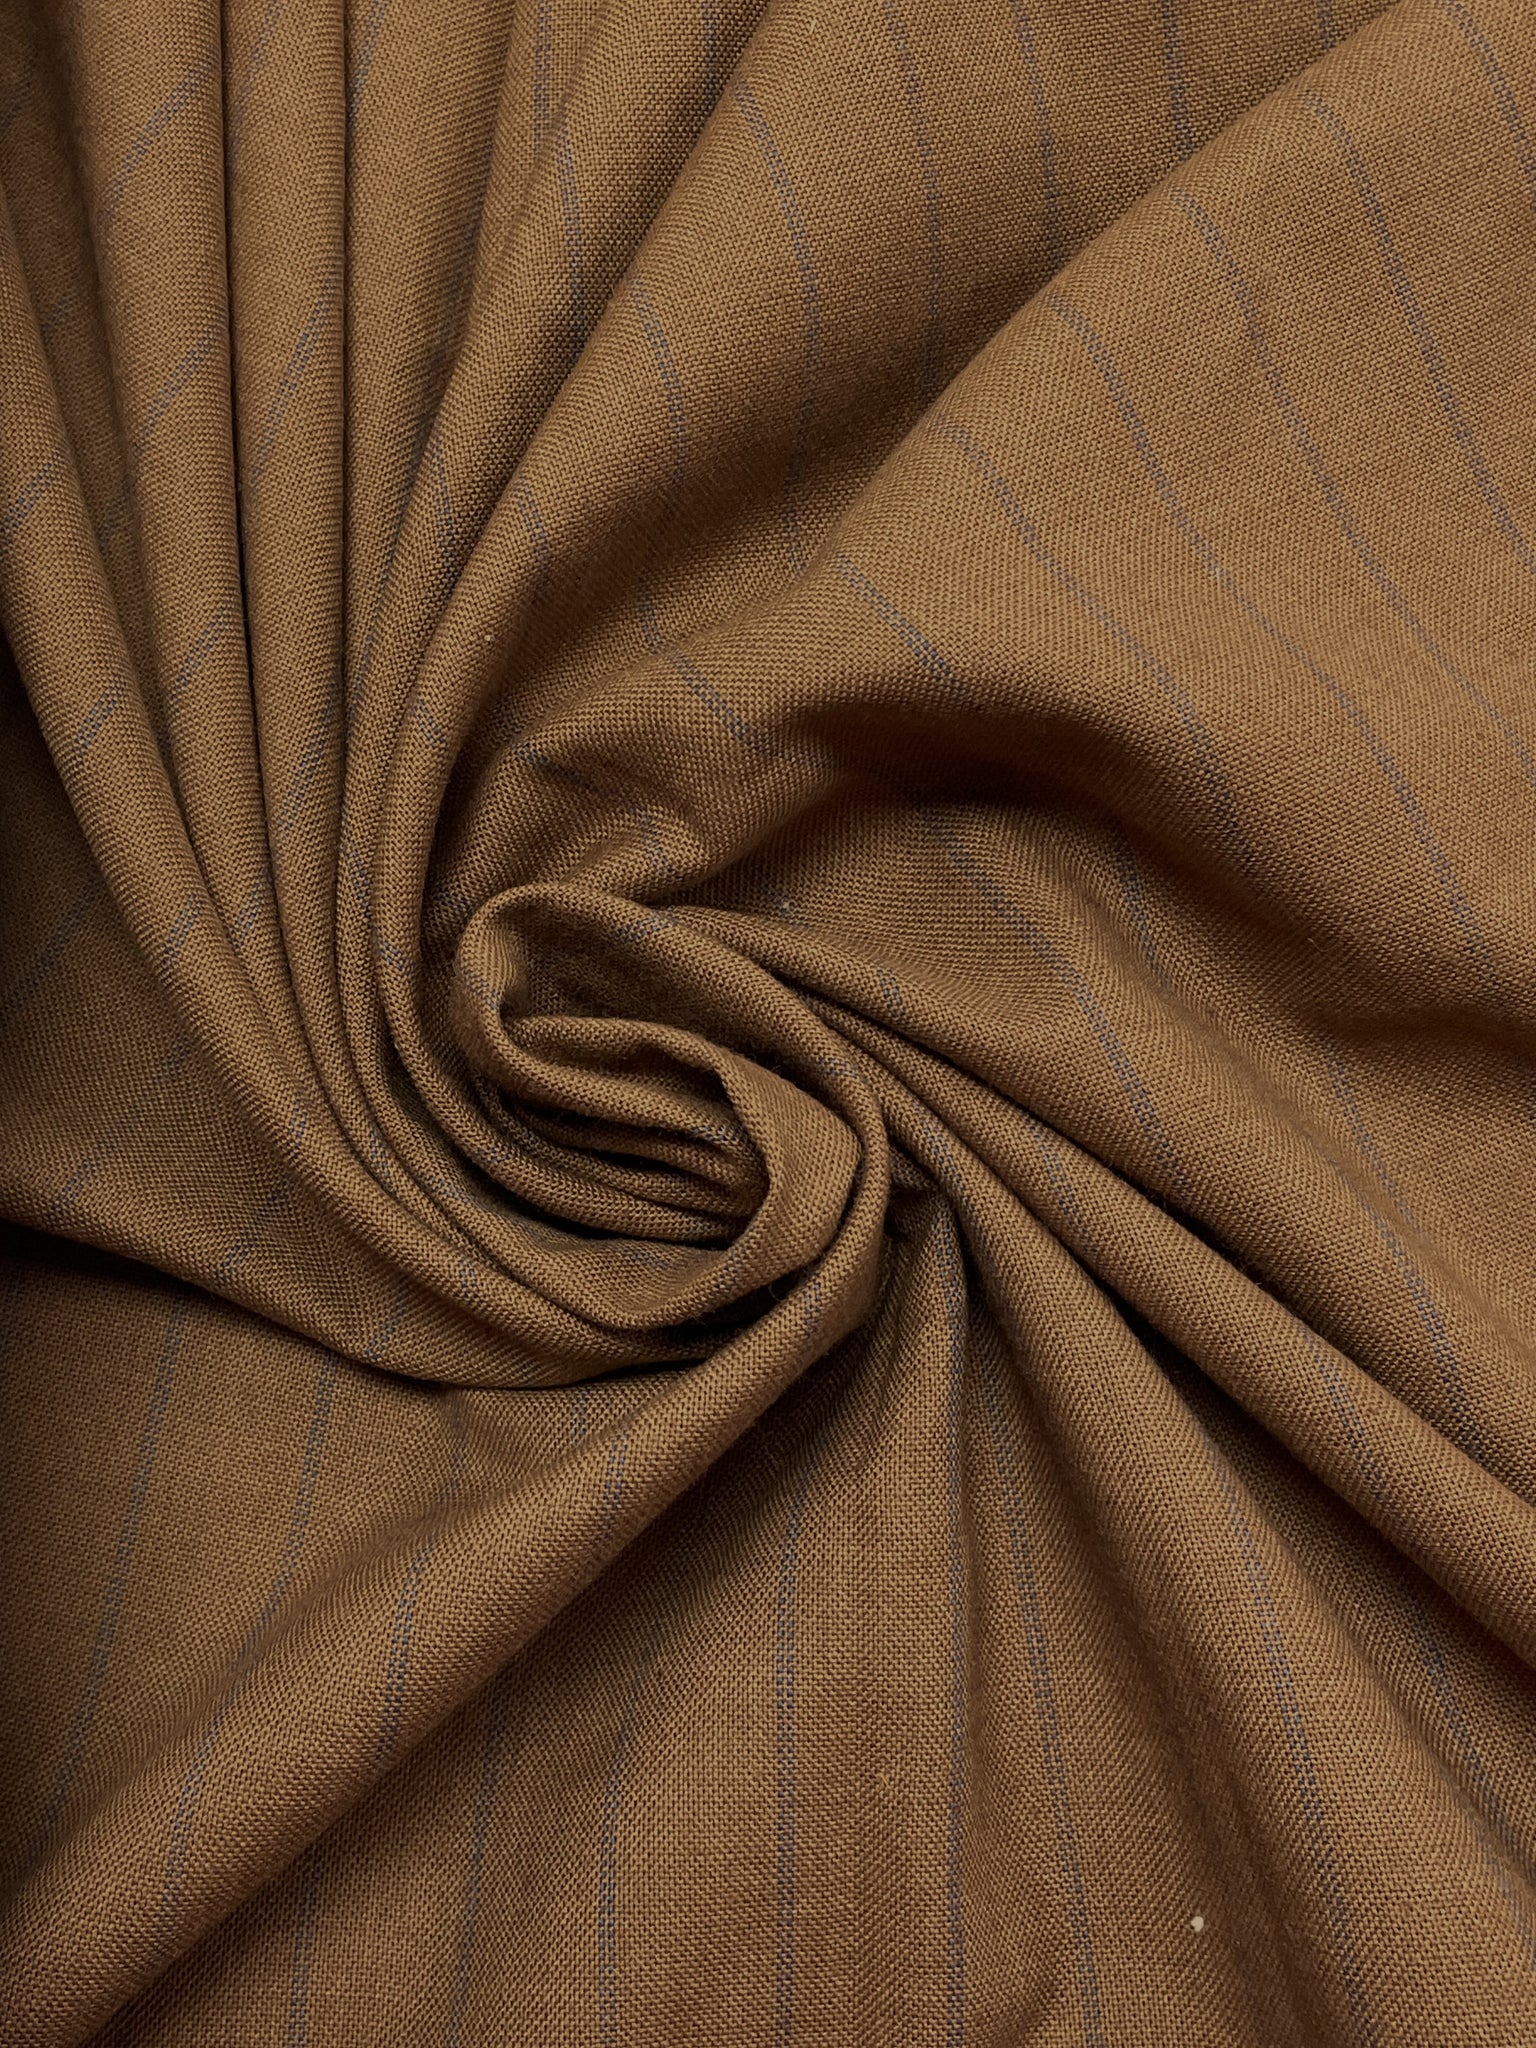 4 YD Polyester Blend - Light Brown with Gray Pin Stripes